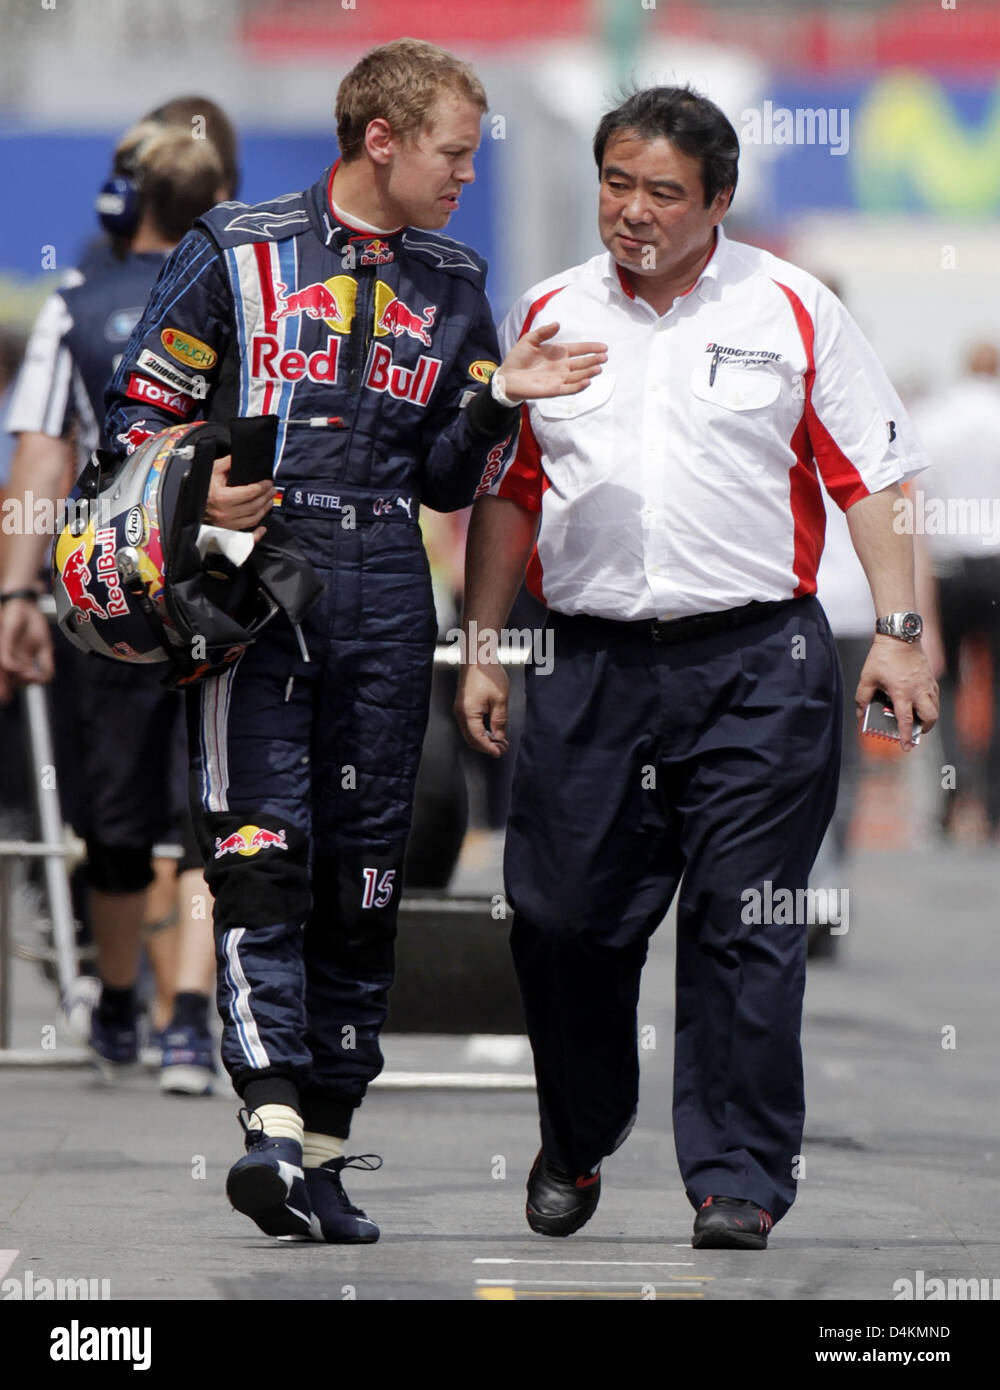 German Formula One driver Sebastian Vettel of Red Bull Racing (L) confers with a Bridgestone engineer after the second practice session at Circuit de Catalunya in Montmelo near Barcelona, Spain, 08 May 2009. The Grand Prix of Spain will take place on 10 May. Photo: Felix Heyder Stock Photo